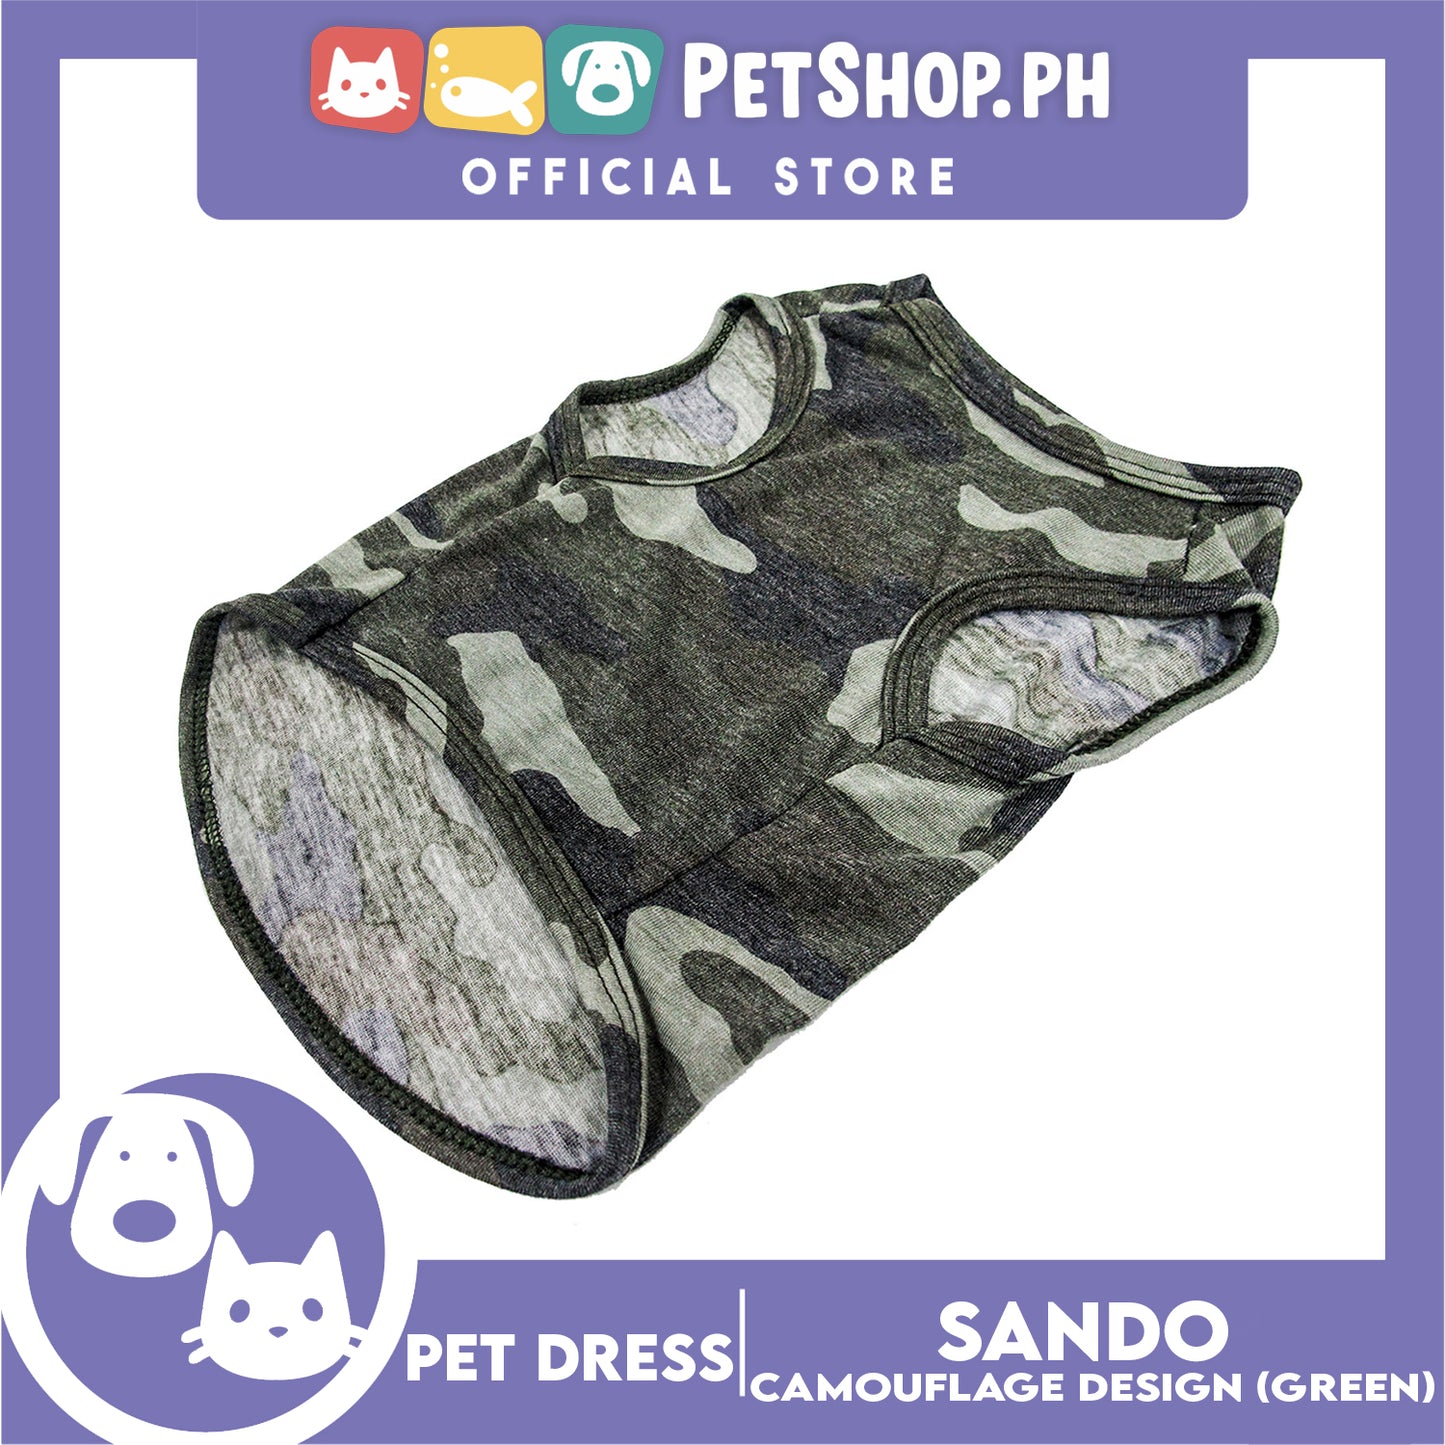 Pet Shirt Camouflage Design Sleeveless Green (Large) for Puppy, Small Dogs and Cats